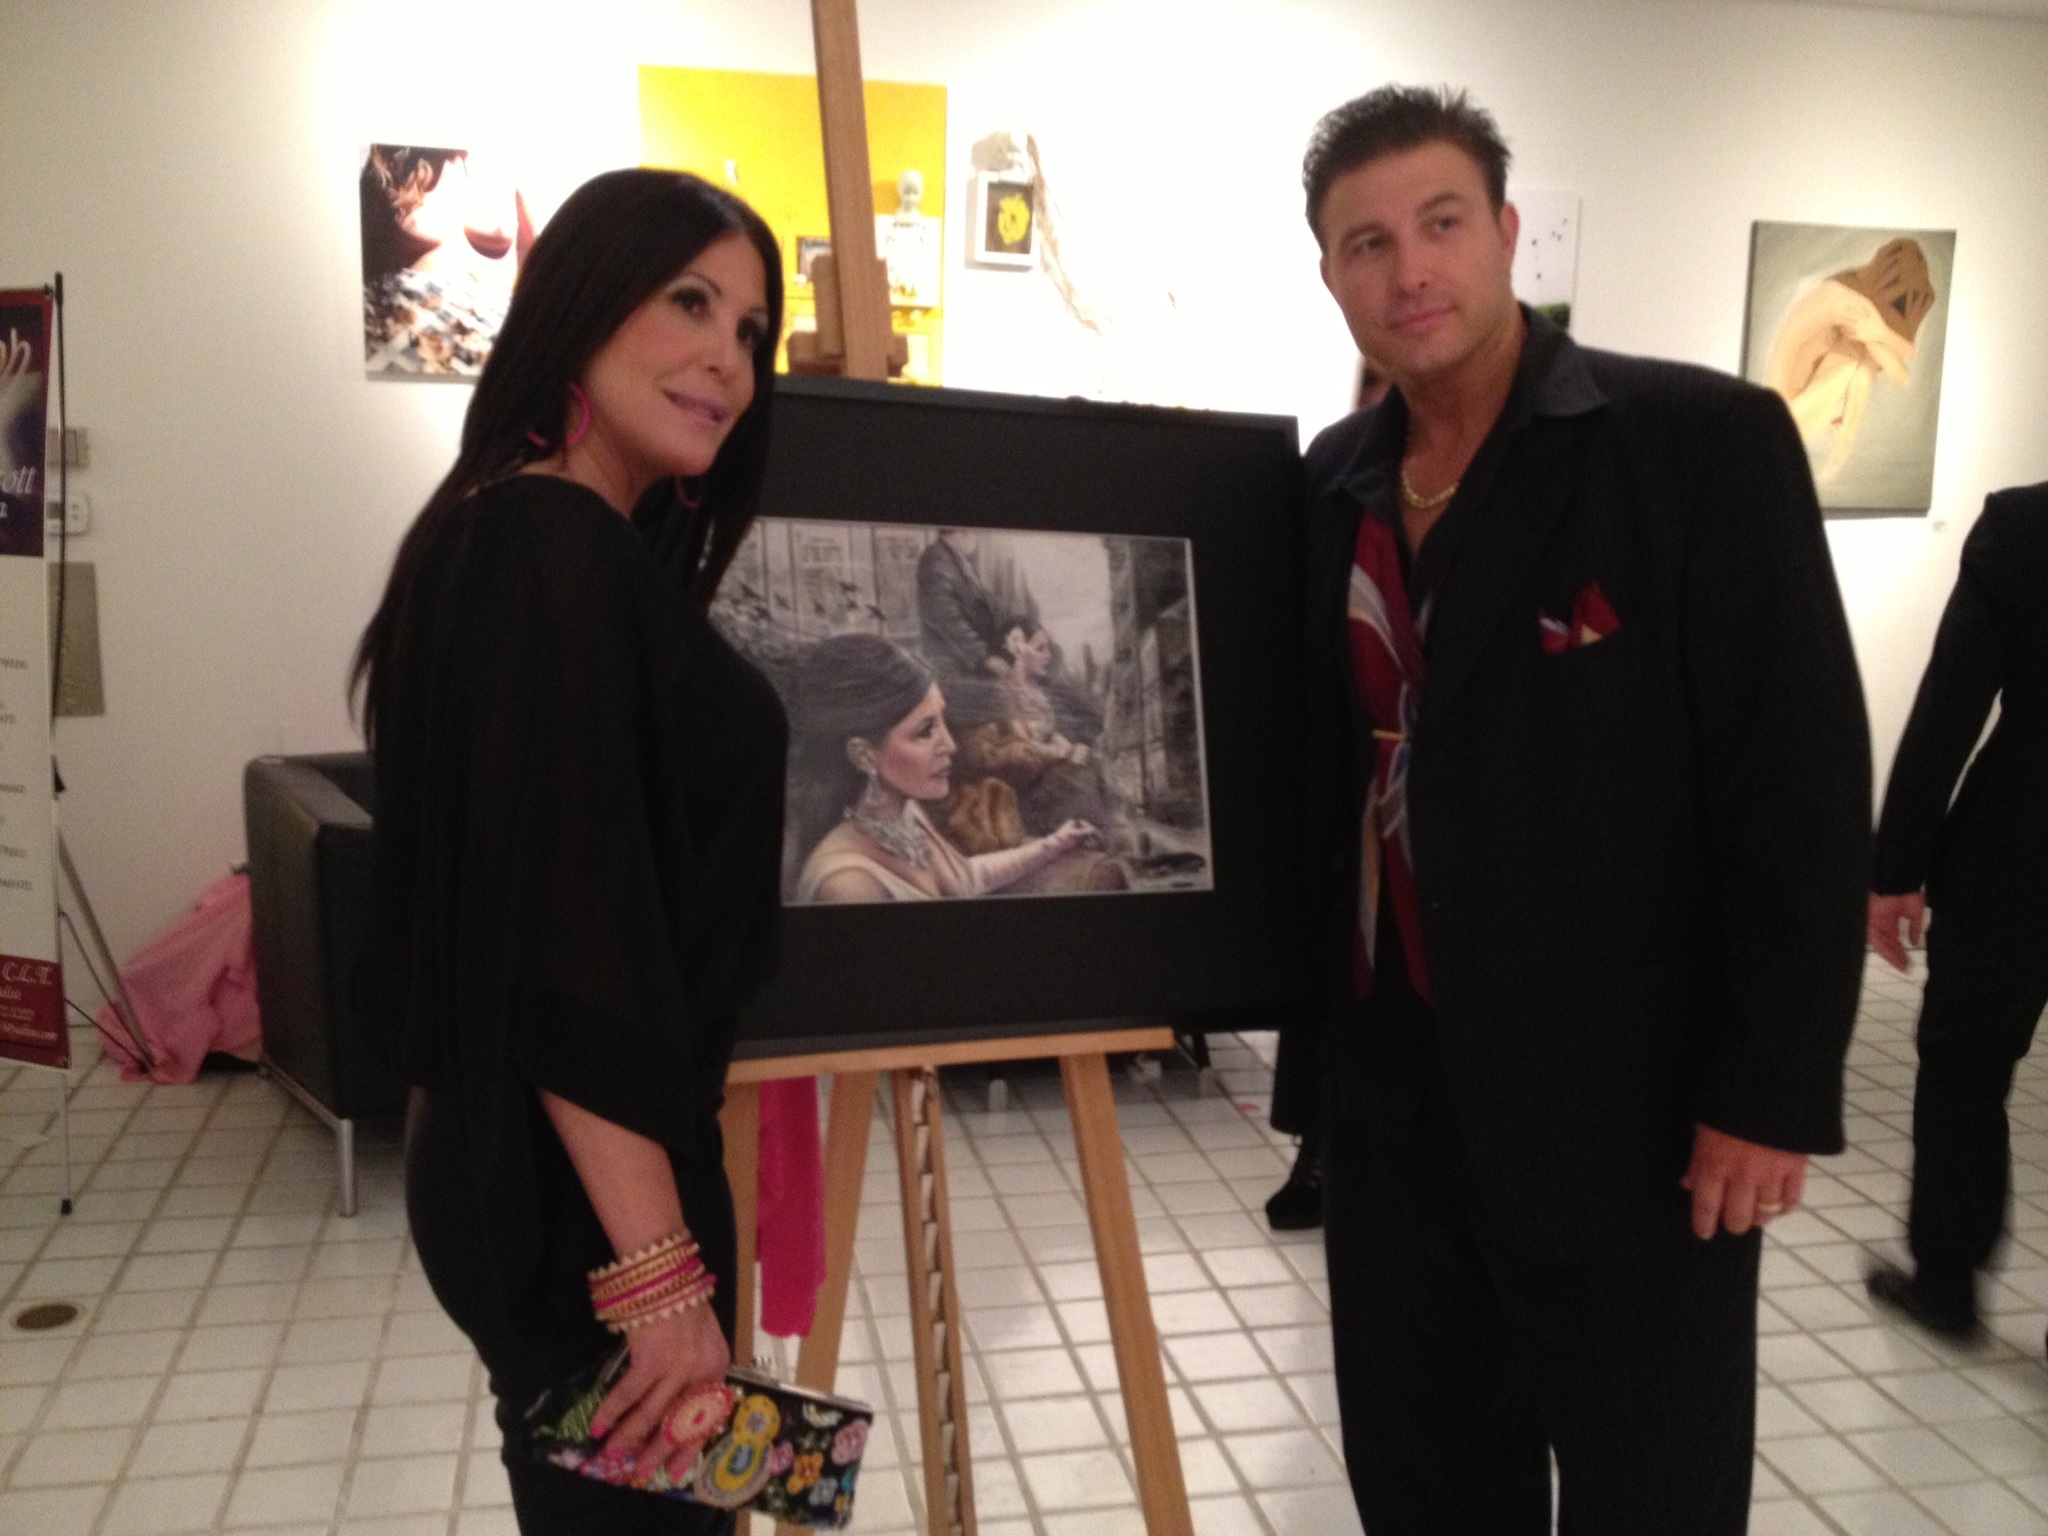 Michael Bell filming a Red Carpet painting unveiling with Toni Marie Ricci for Mob Wives Season 3